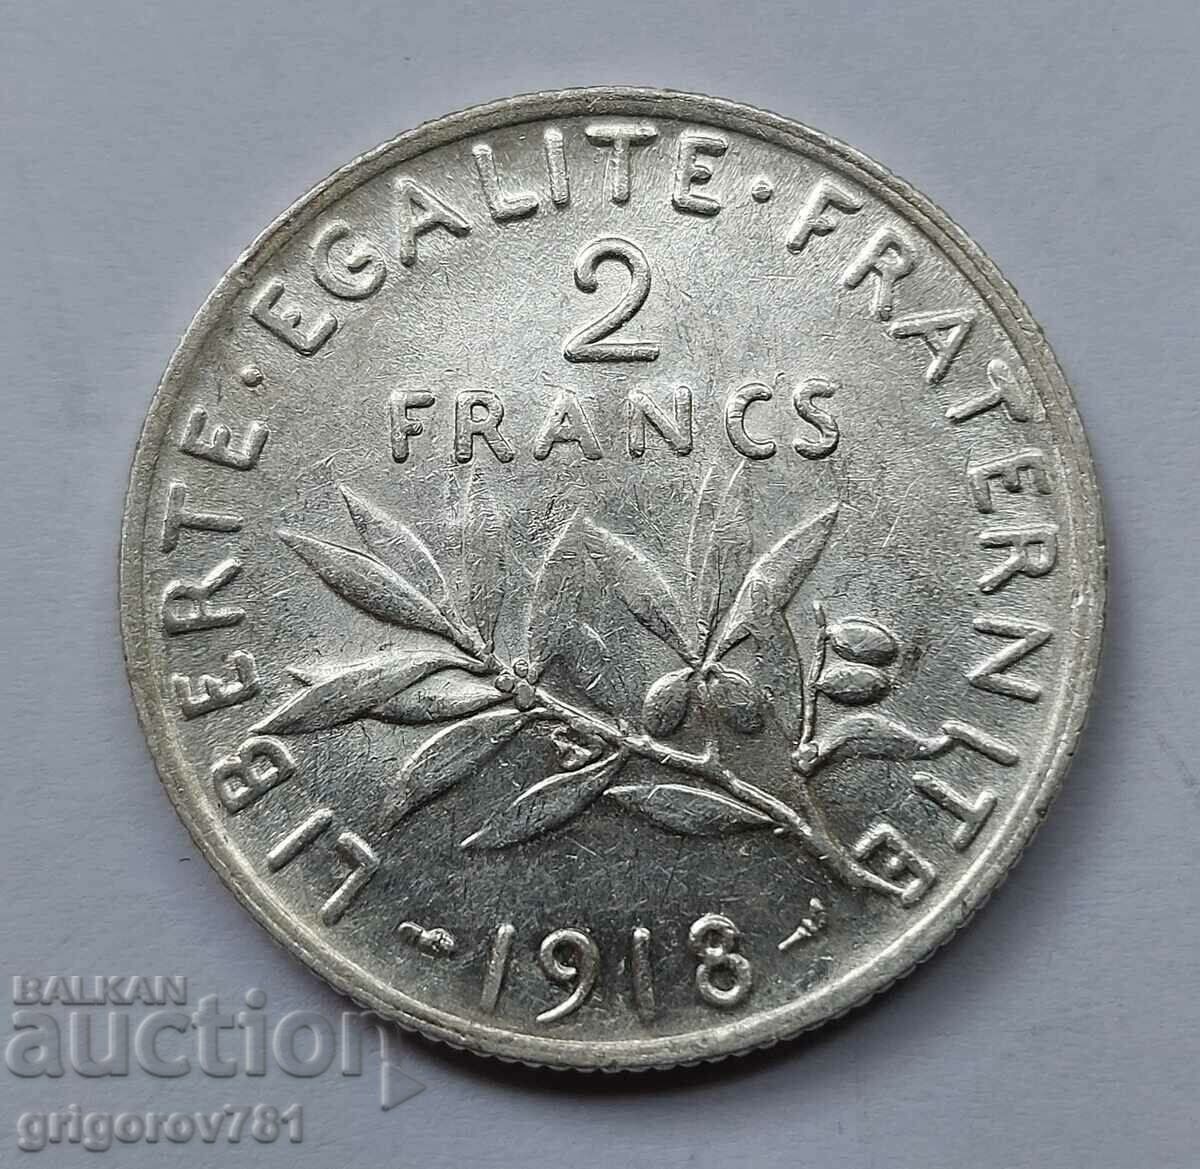 2 Francs Silver France 1918 - Silver Coin #136